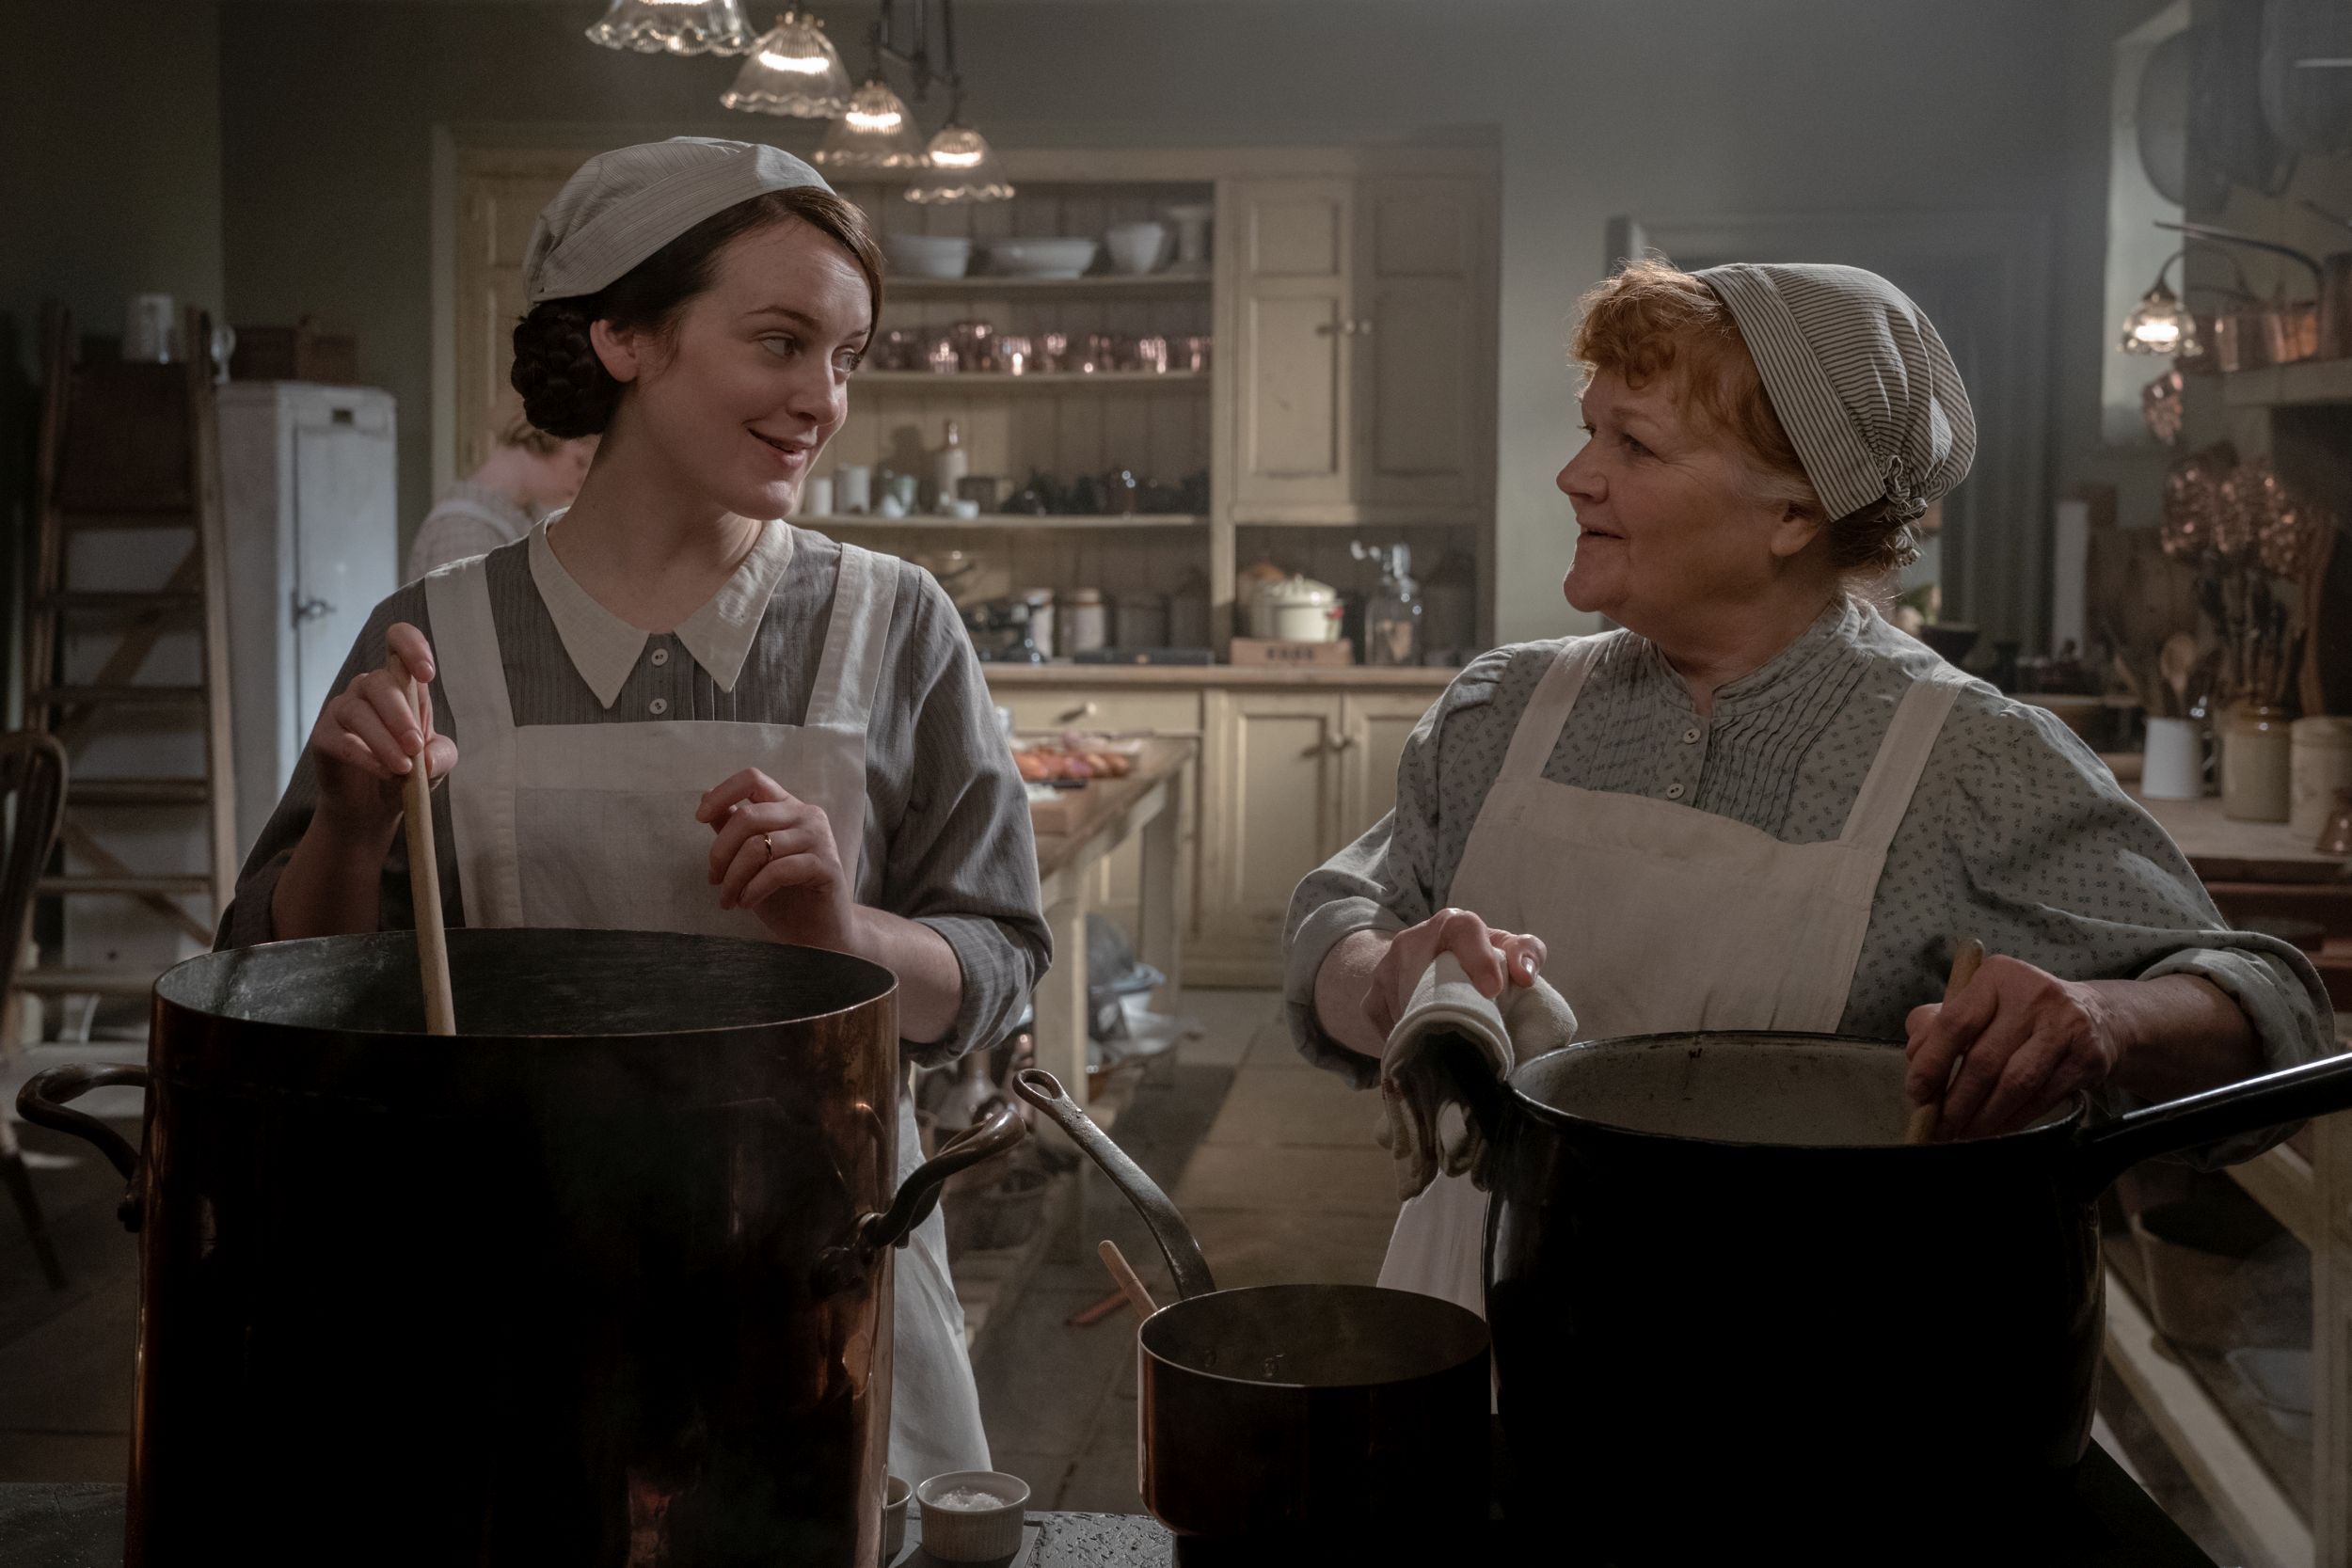 Sophie McShera stars as Daisy and Lesley Nicol stars as Mrs. Patmore in DOWNTON ABBEY: A New Era, a